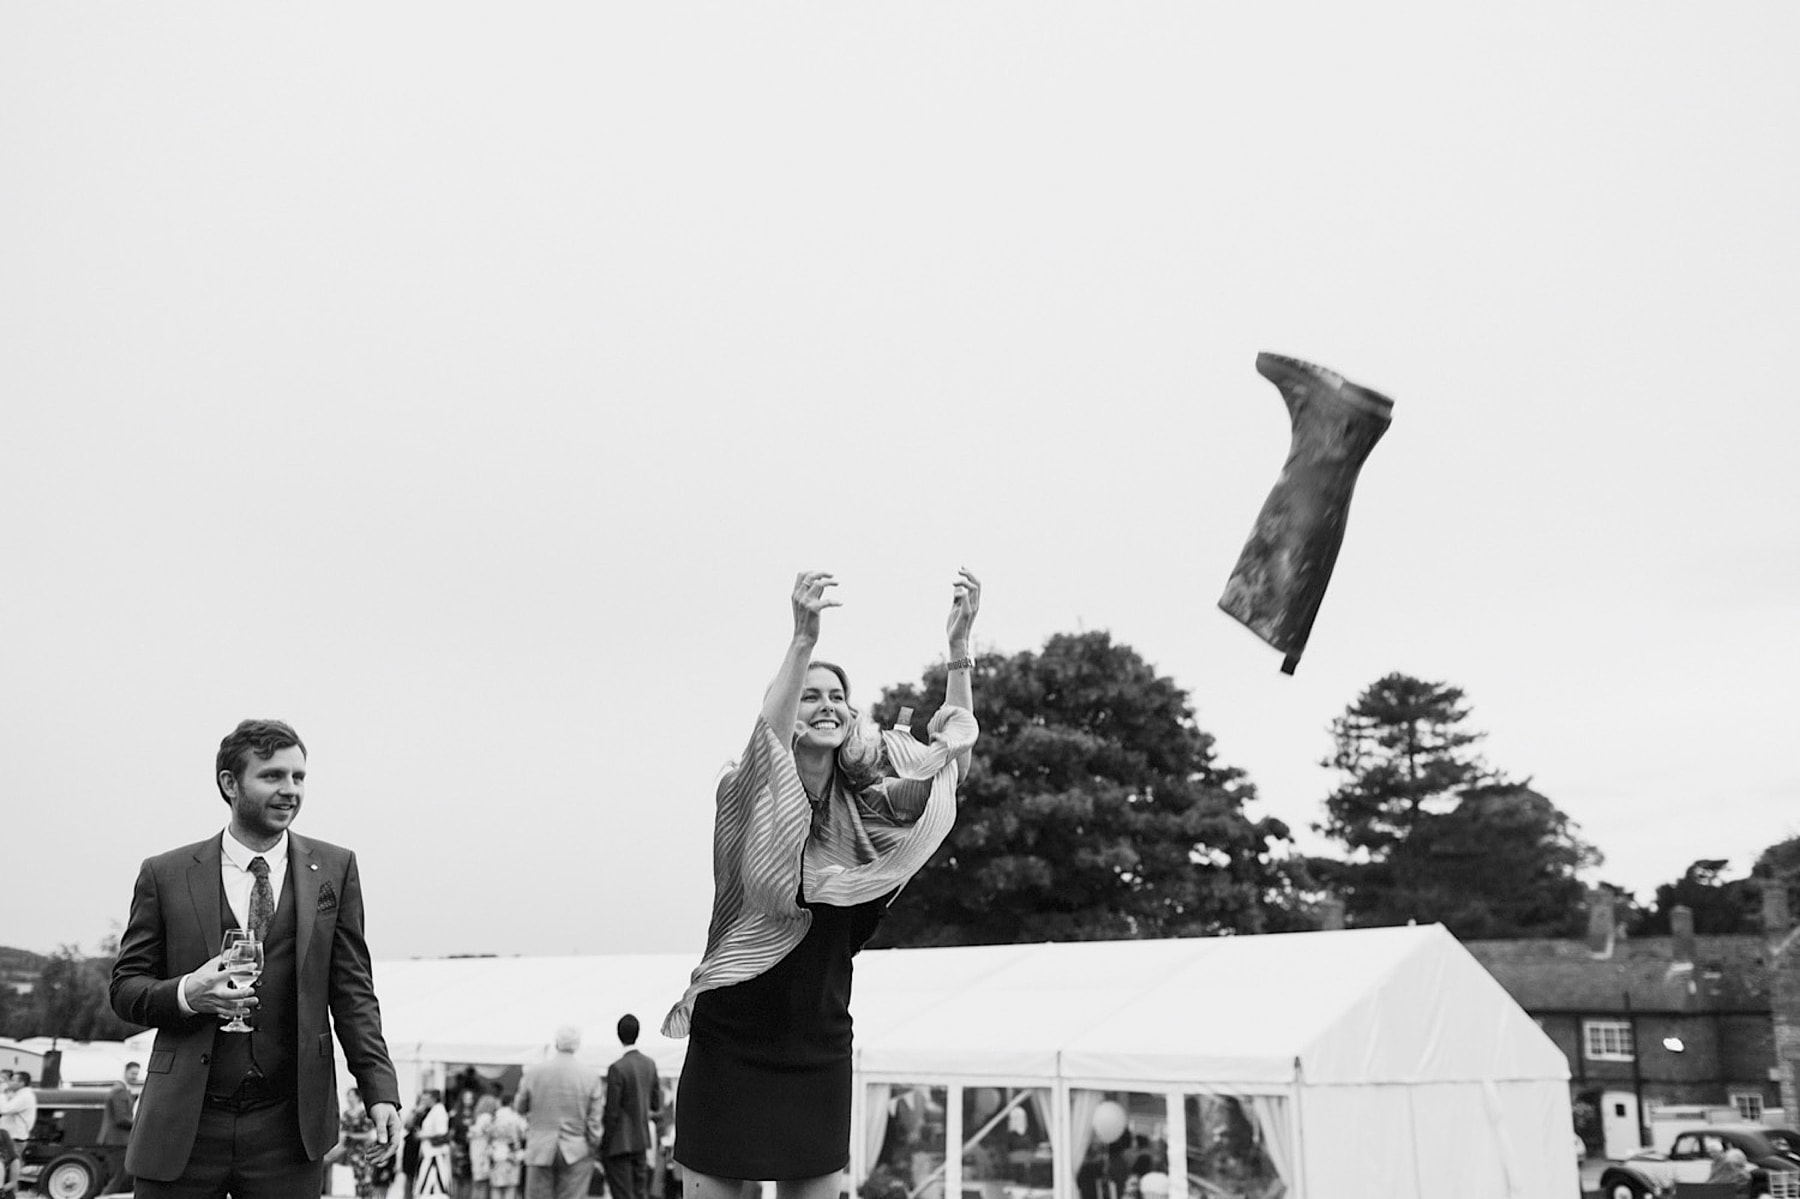 tossing welly game fun wedding moment